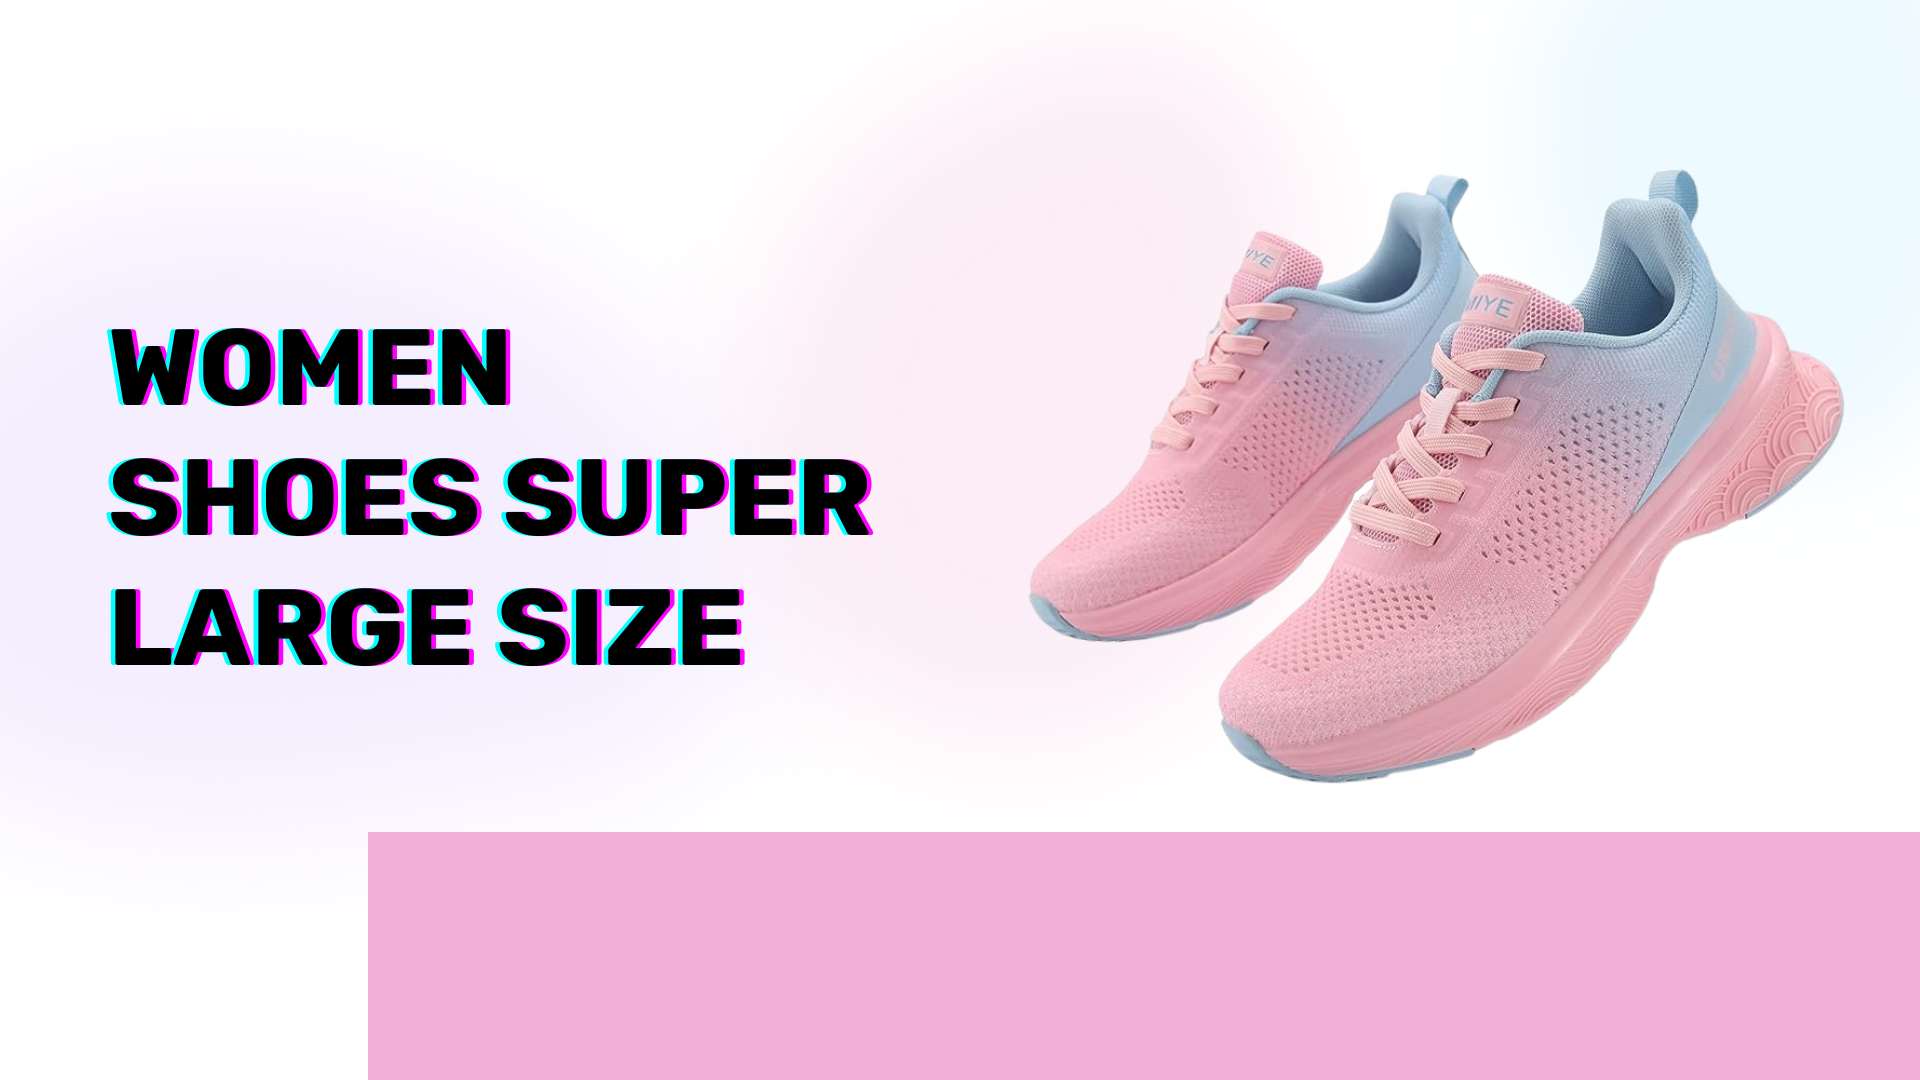 Women Shoes Super Large Size: Finding Comfort and Style for Every Step